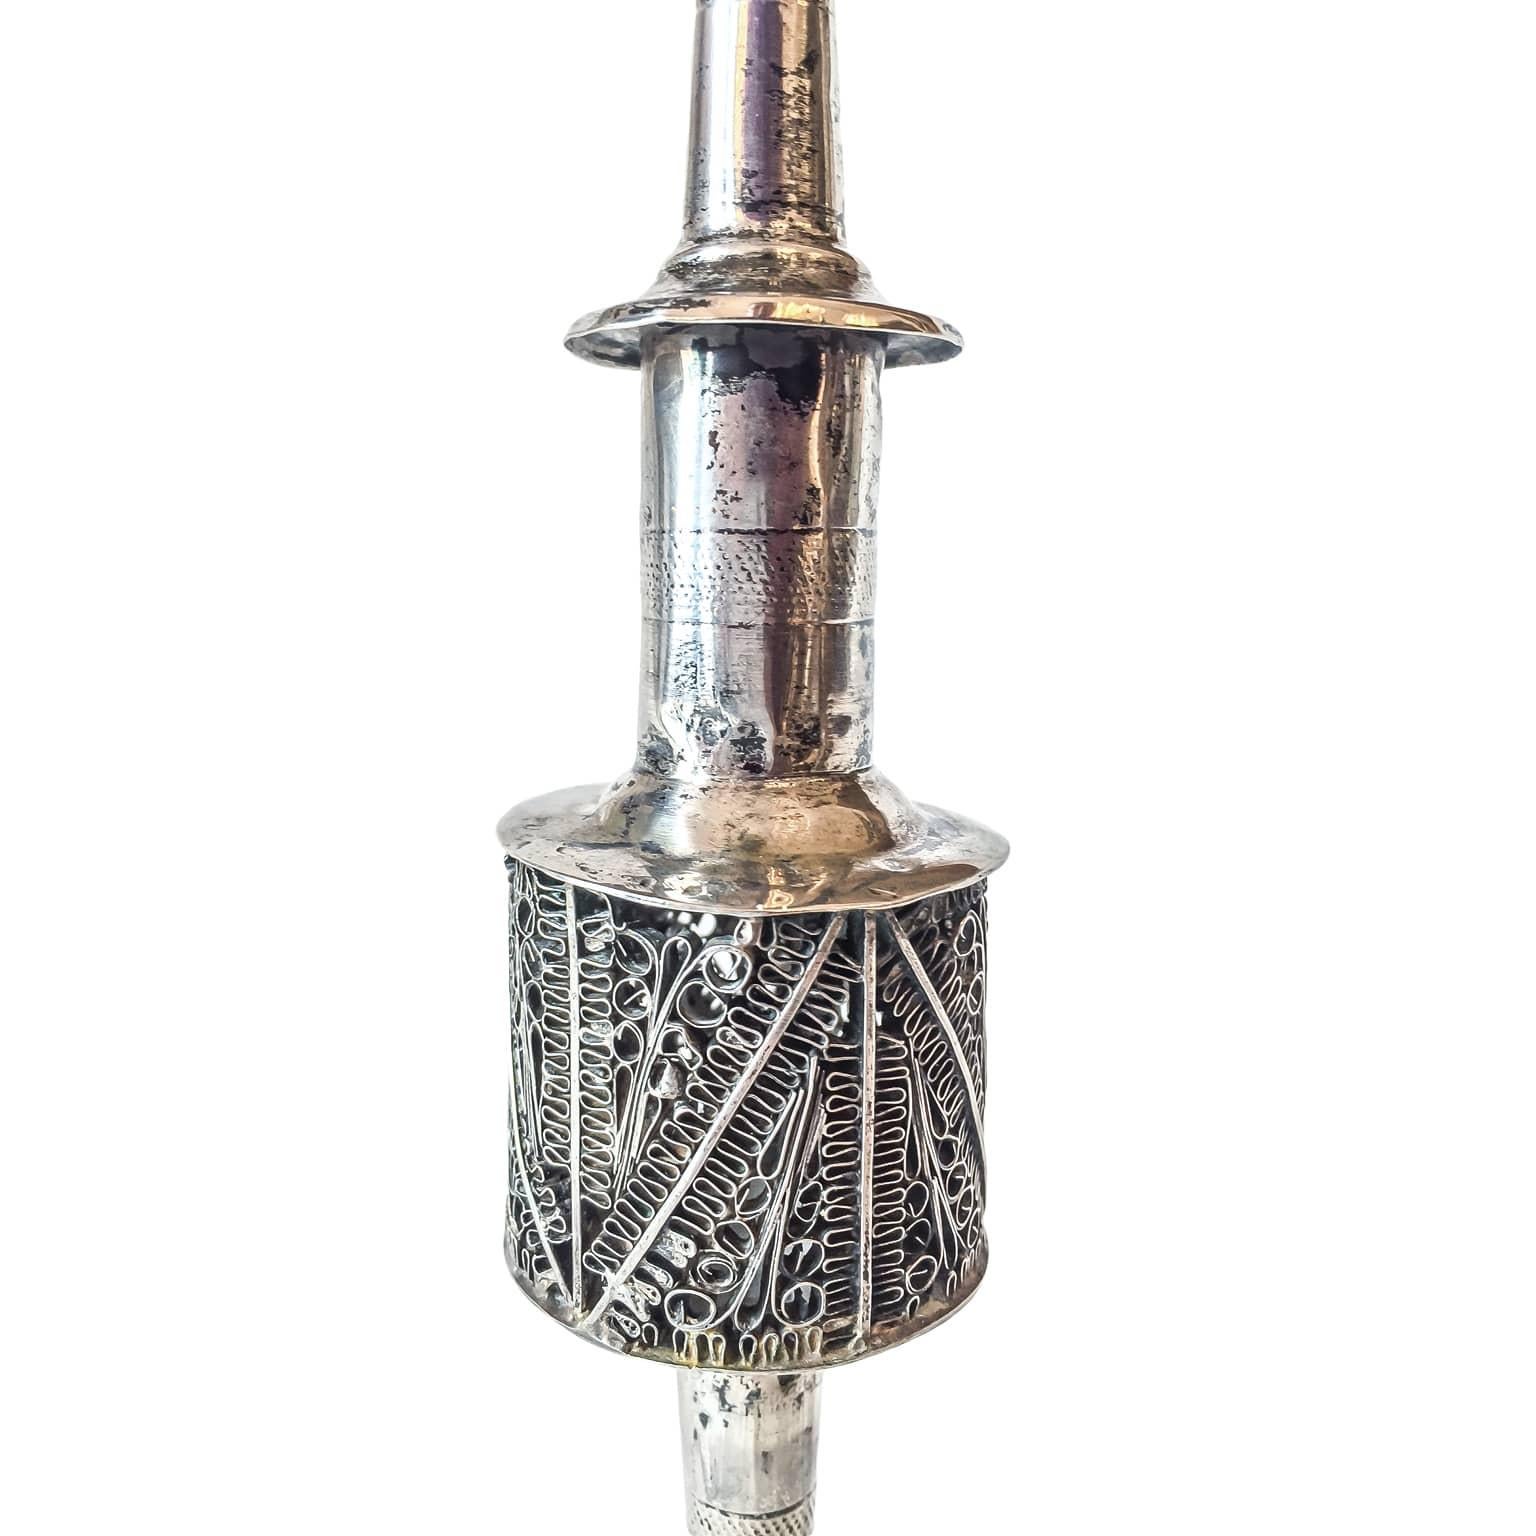 Antique Judaica Havdalah Besamin dating back to late 19th century, a silver and filigree spice tower. The Havdalah spice tower is set on a round base with Continental silver marks, hallmarked by German silver maker Weichhardt Rudolf, active in